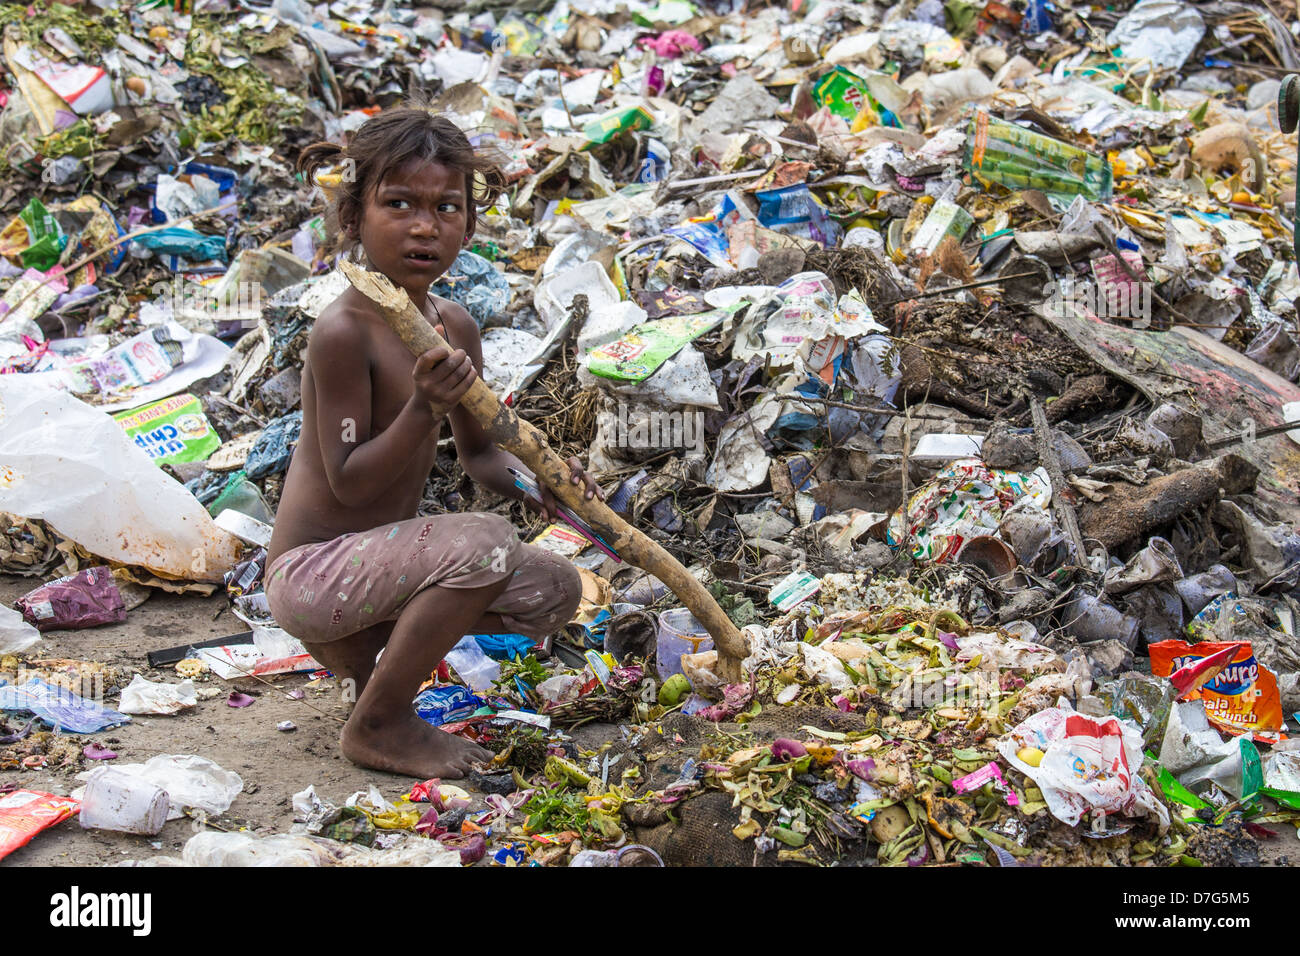 young-girl-scavenging-for-scraps-in-the-garbage-delhi-india-D7G5M5.jpg